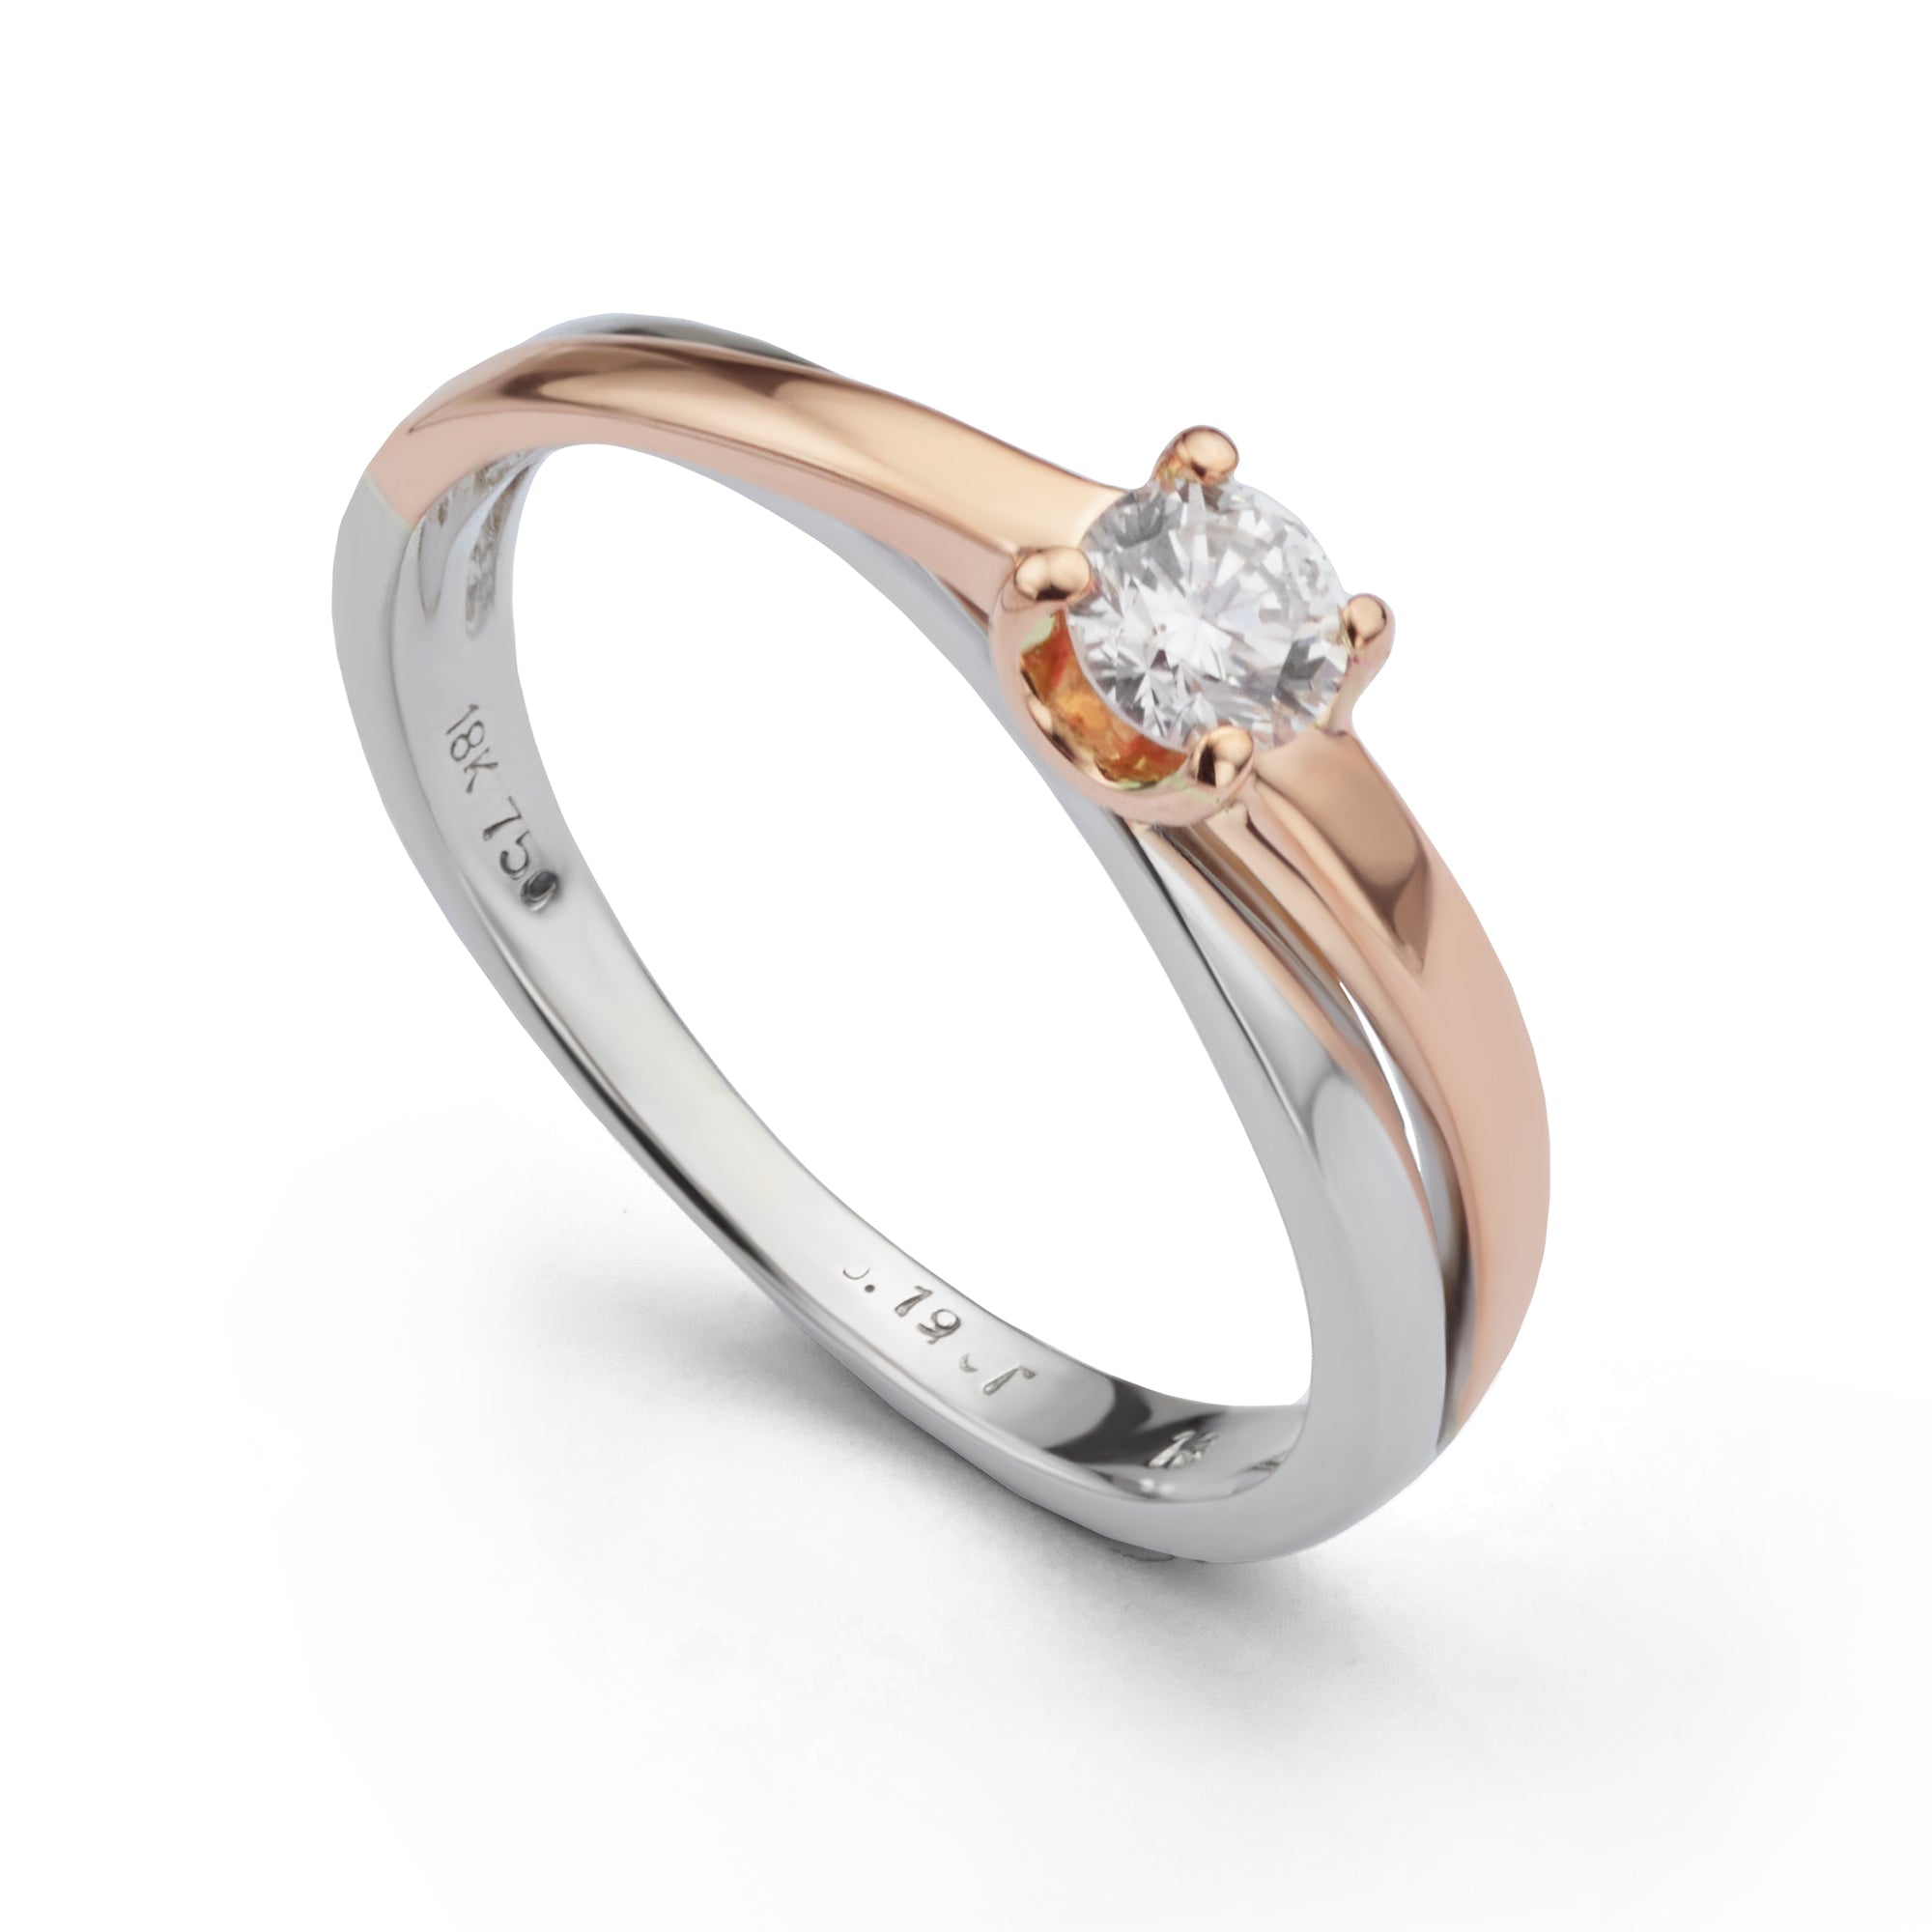 Pre-loved rose and white gold engagement ring